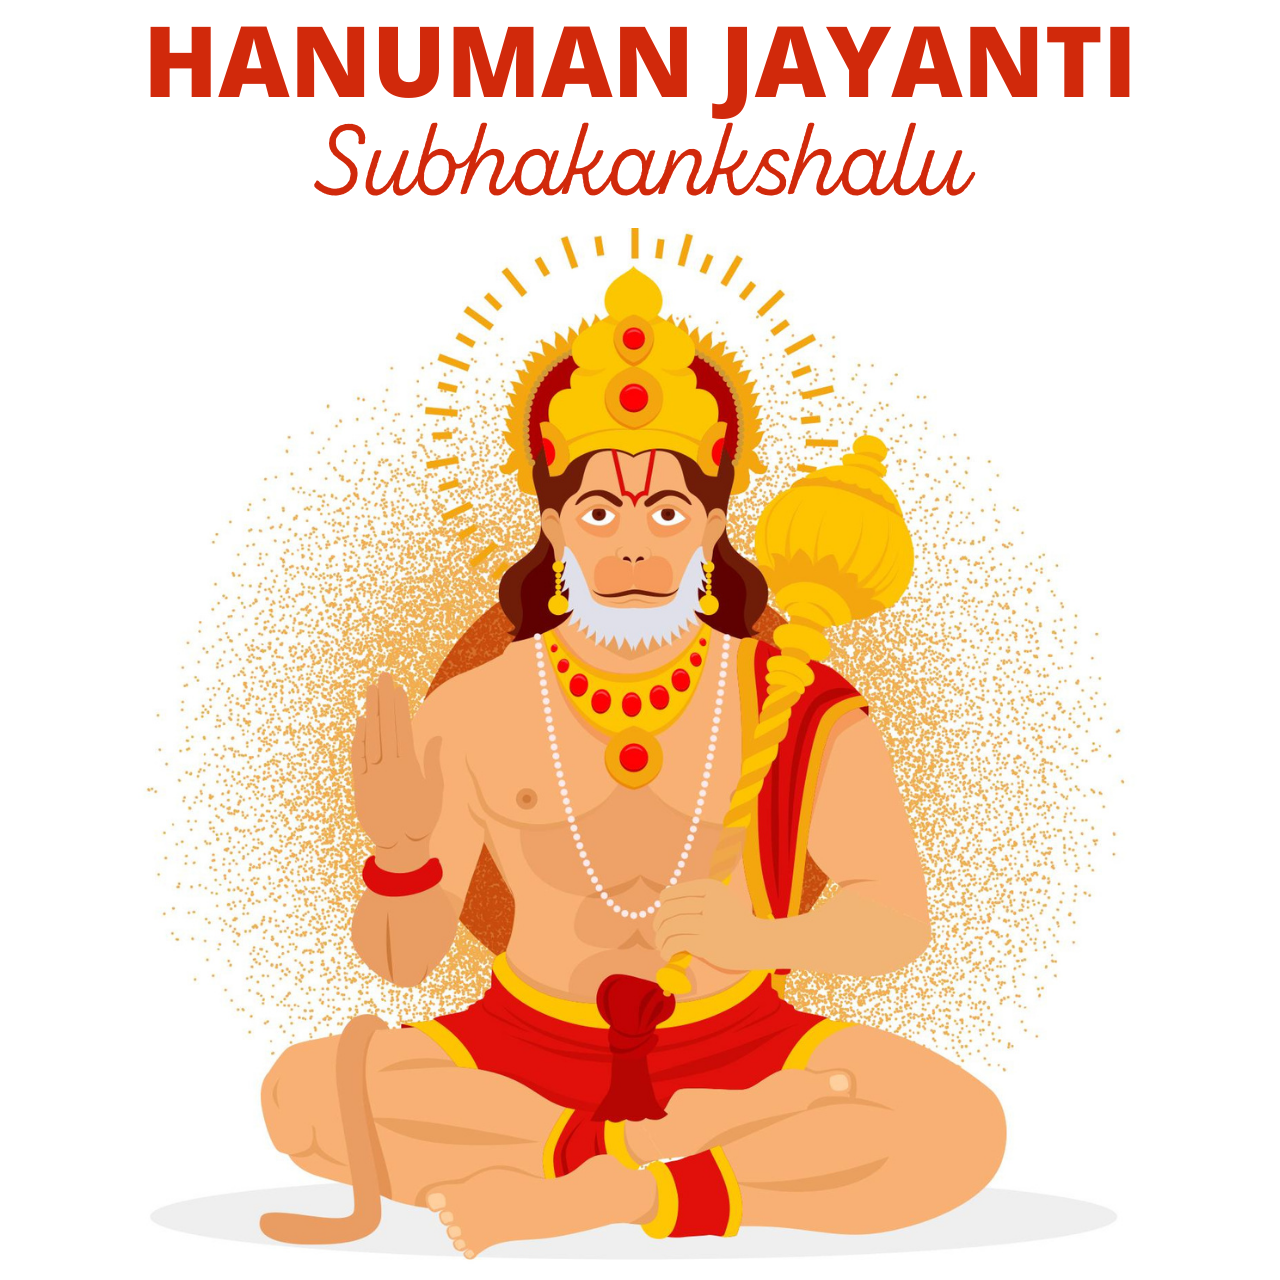 Hanuman Jayanti (Telugu) 2021 Wishes, Images, Greetings, Quotes, Status, and Messages to Share